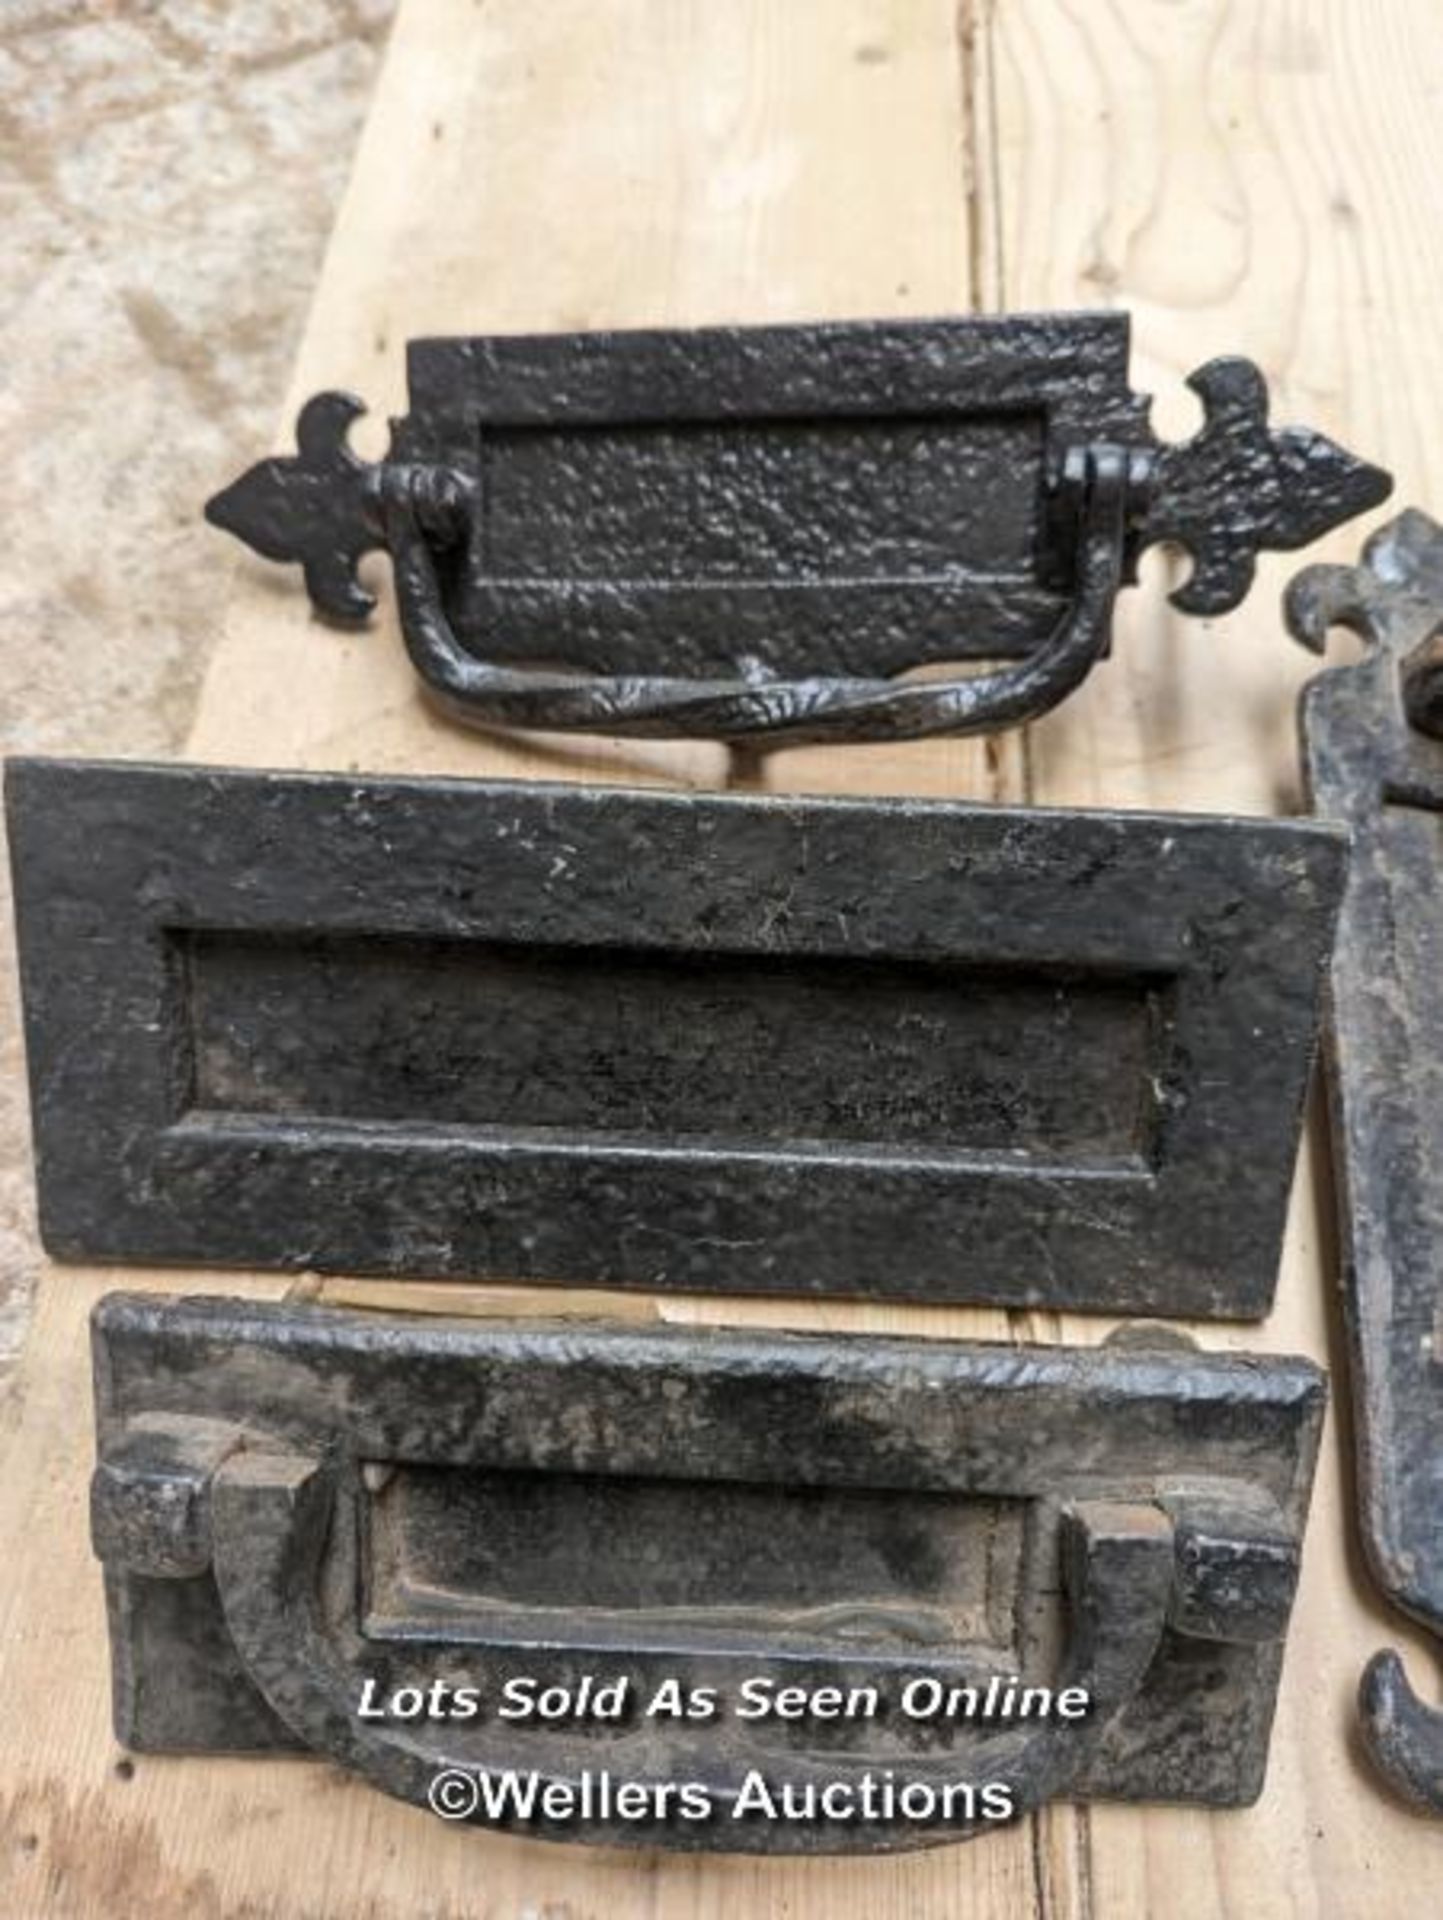 Selection of cast iron front door furniture including letterboxes, knockers, door pulls. - Image 2 of 3